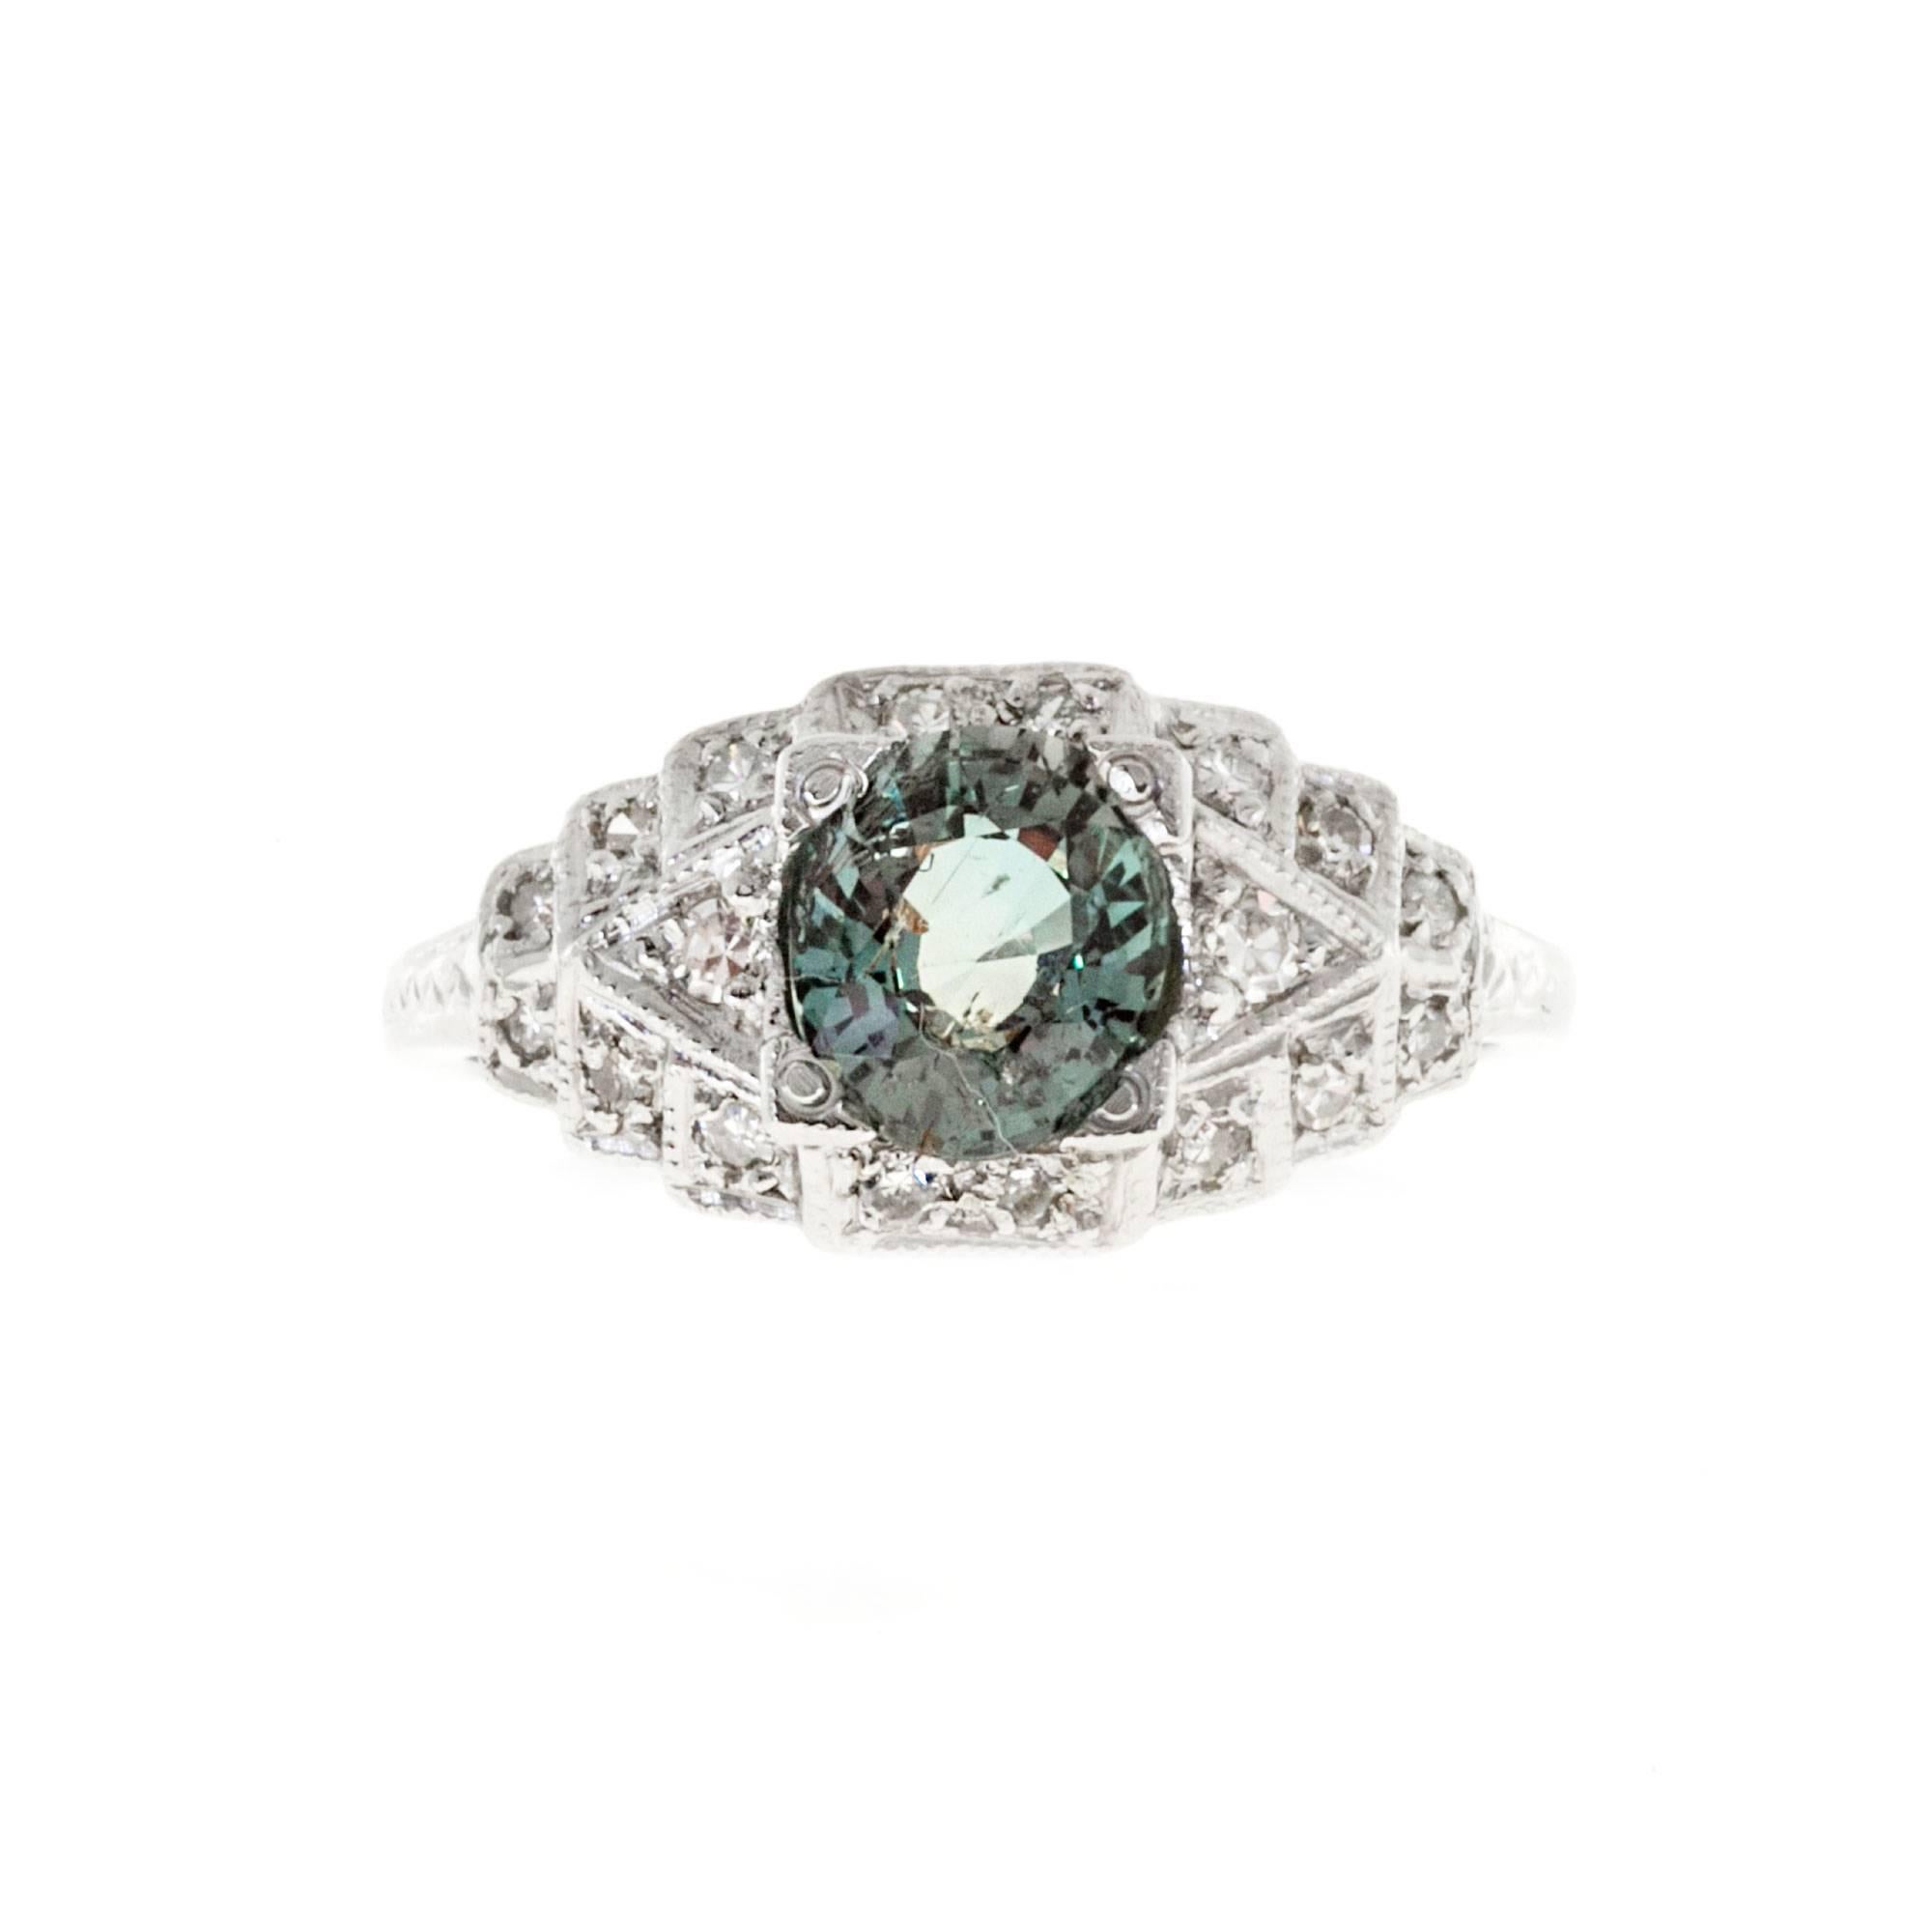 Natural color change Alexandrite vintage 1920 Platinum diamond ring. GIA certified green to pinkish purple color change in different lights.

1 oval green to pinkish purple old cut Alexandrite, approx. total weight 1.25cts, natural no